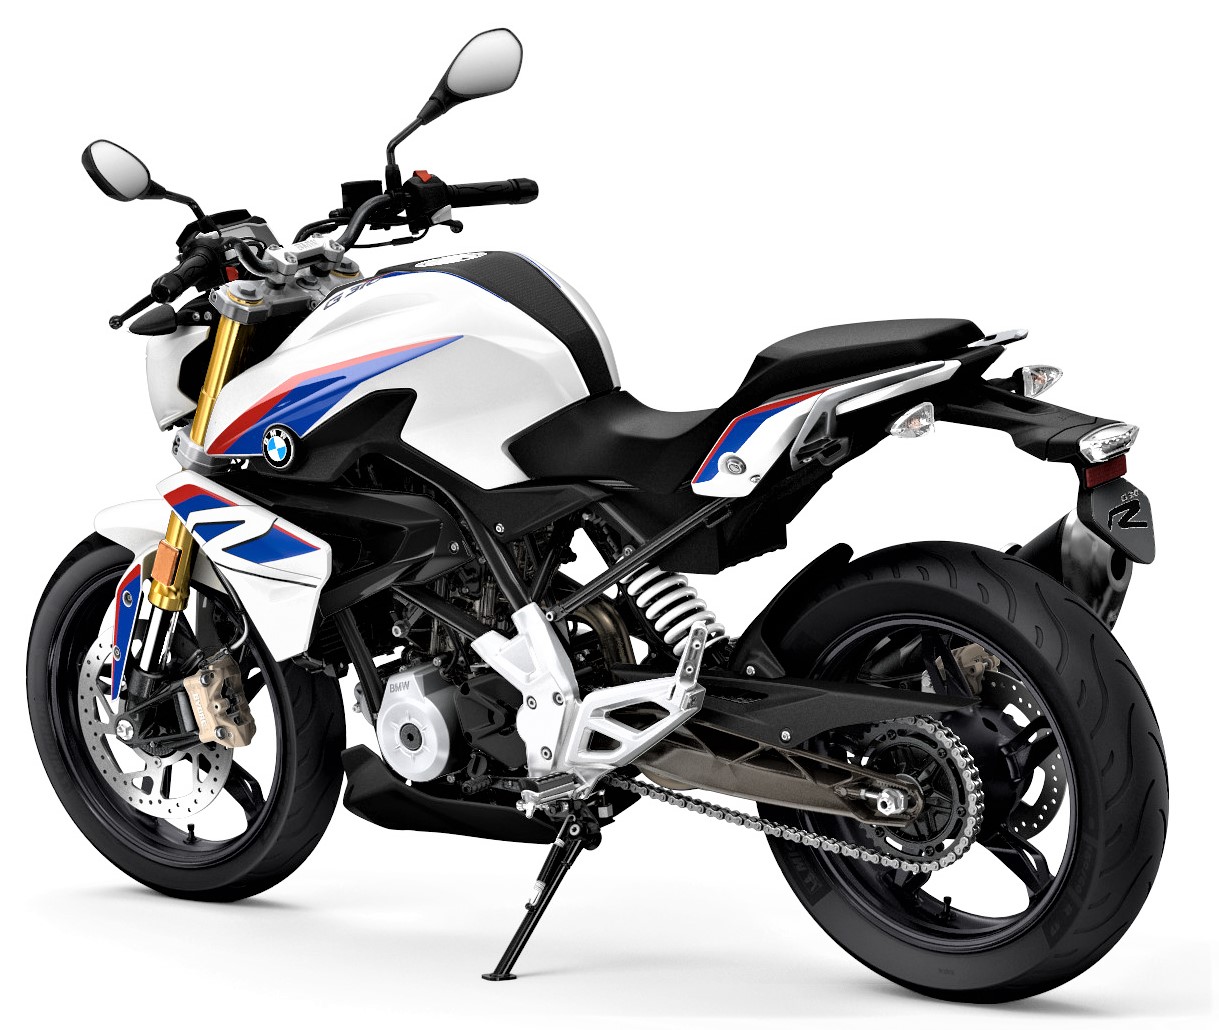 BMW G310R Launched in India